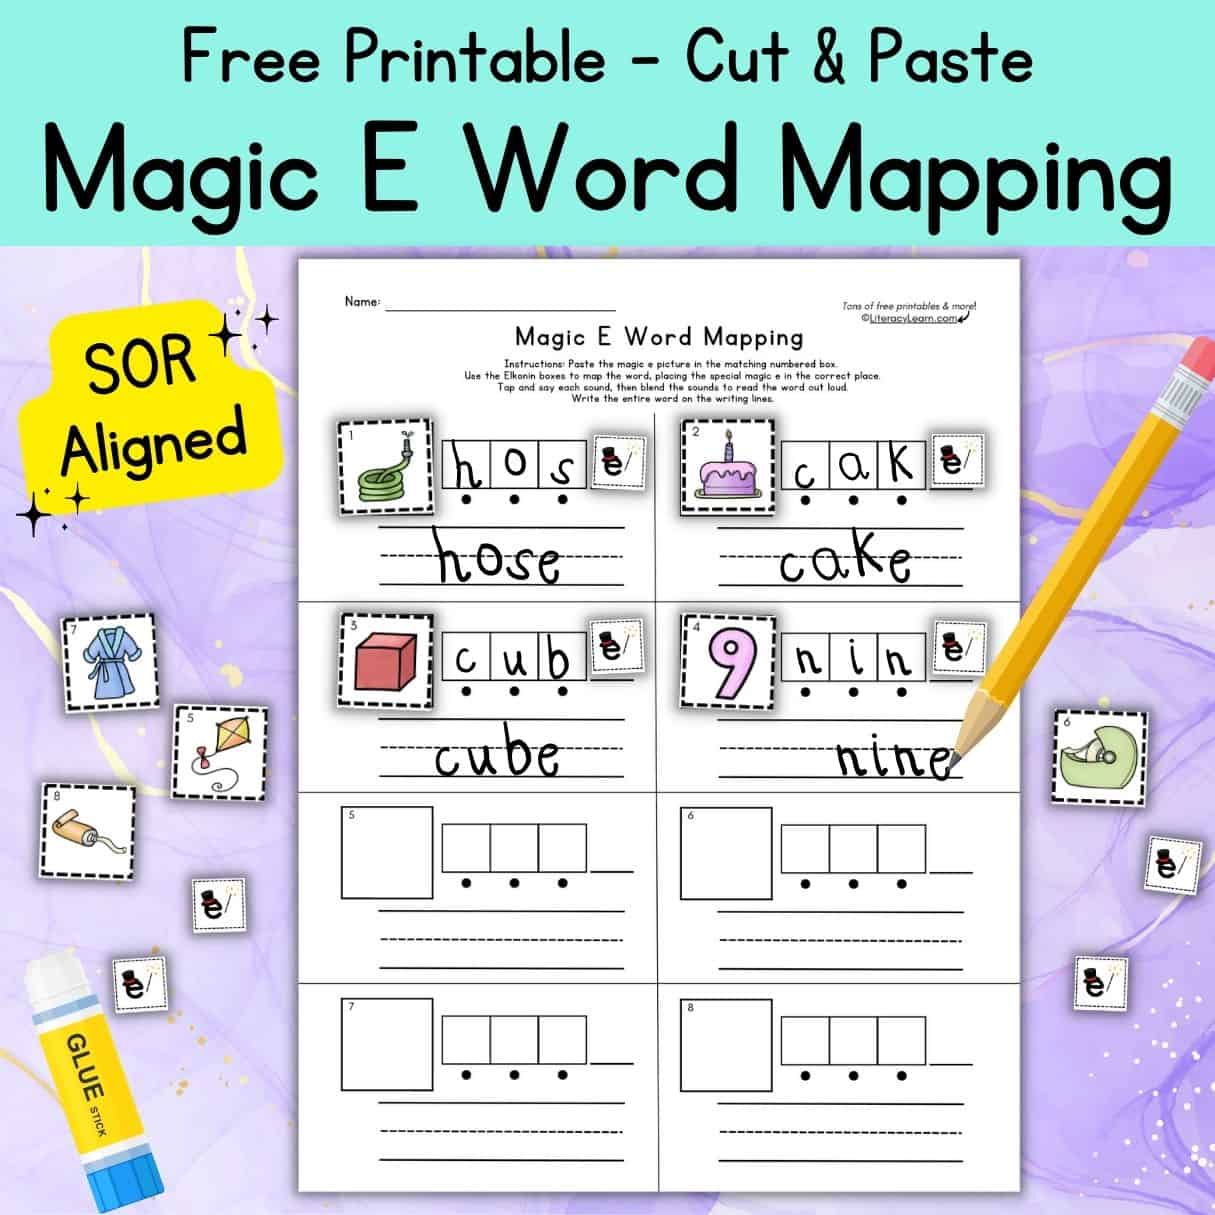 Colorful graphic with CVCe/Magic e Word Mapping worksheet, pencil, and glue stick. 